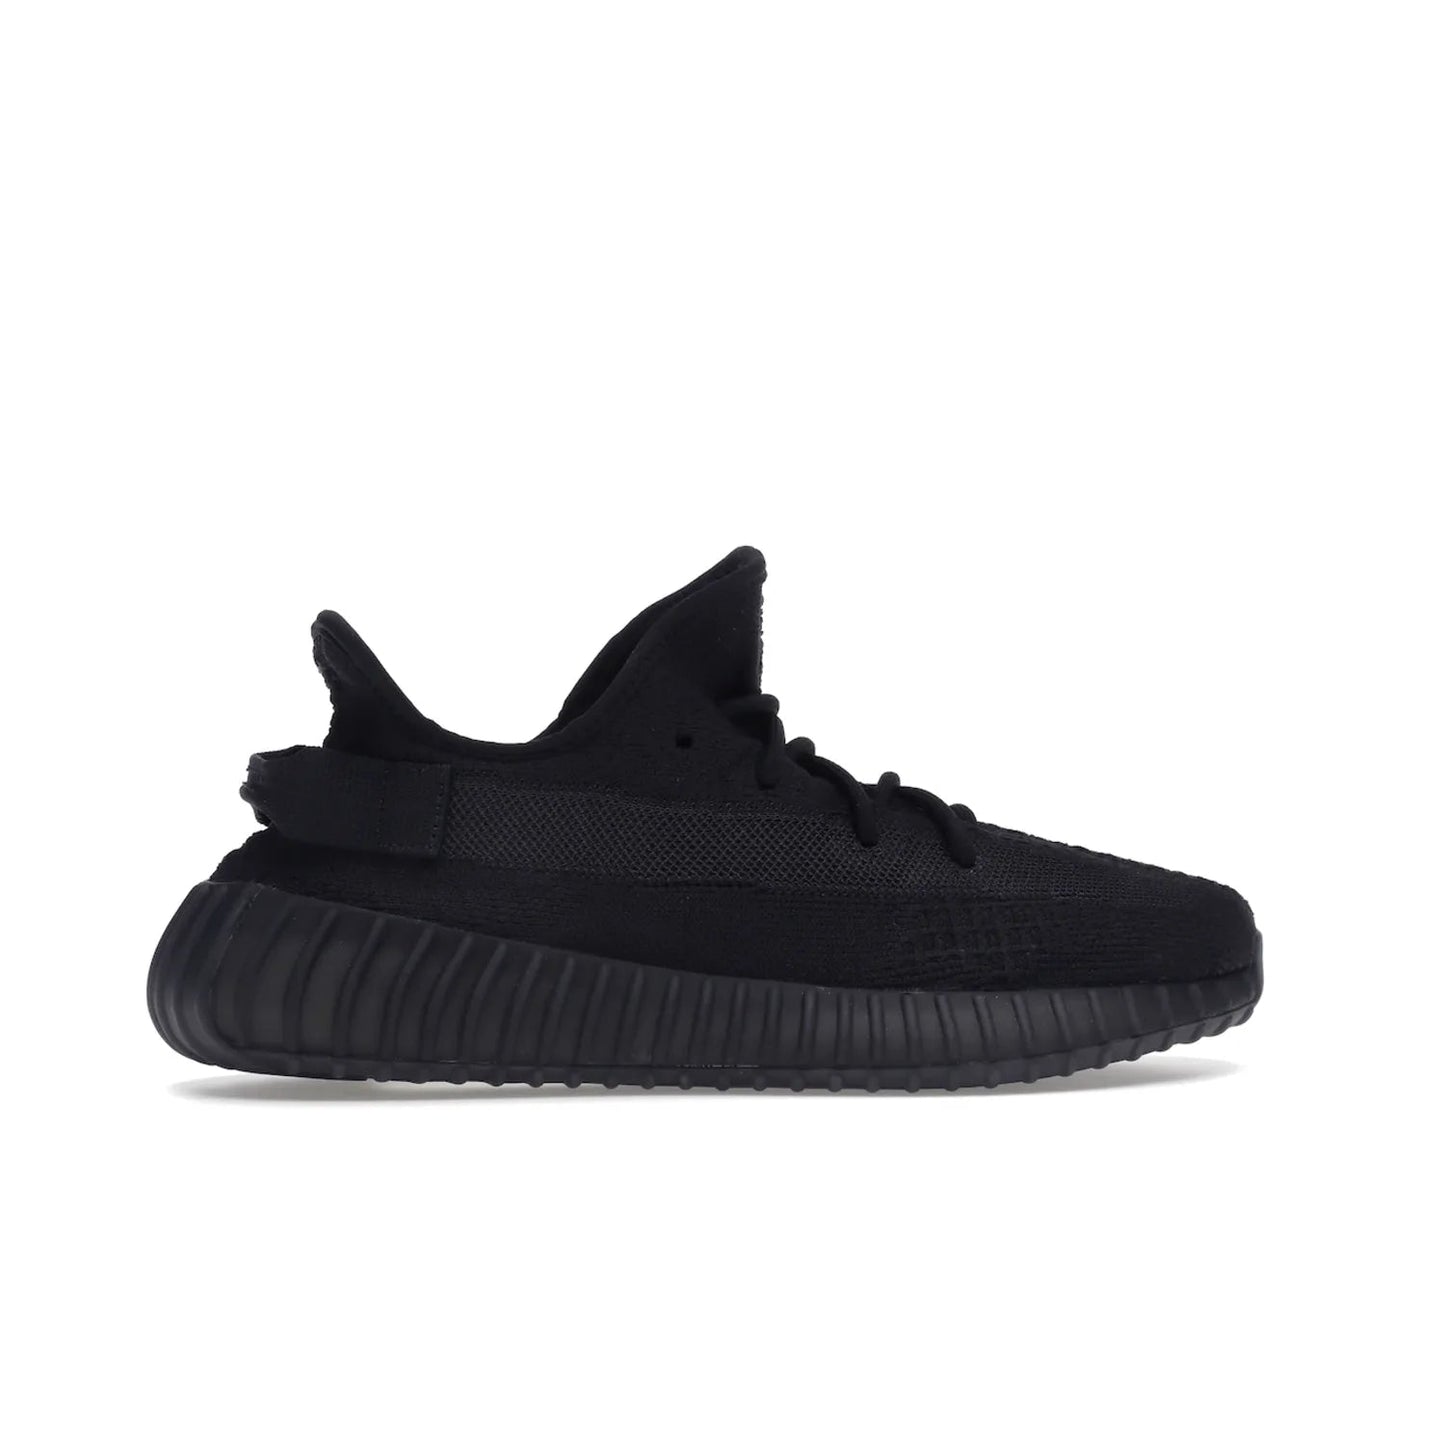 adidas Yeezy Boost 350 V2 Onyx - Image 36 - Only at www.BallersClubKickz.com - Adidas Yeezy Boost 350 V2 Onyx Triple Black shoes for comfort and style. Arriving Spring 2022.